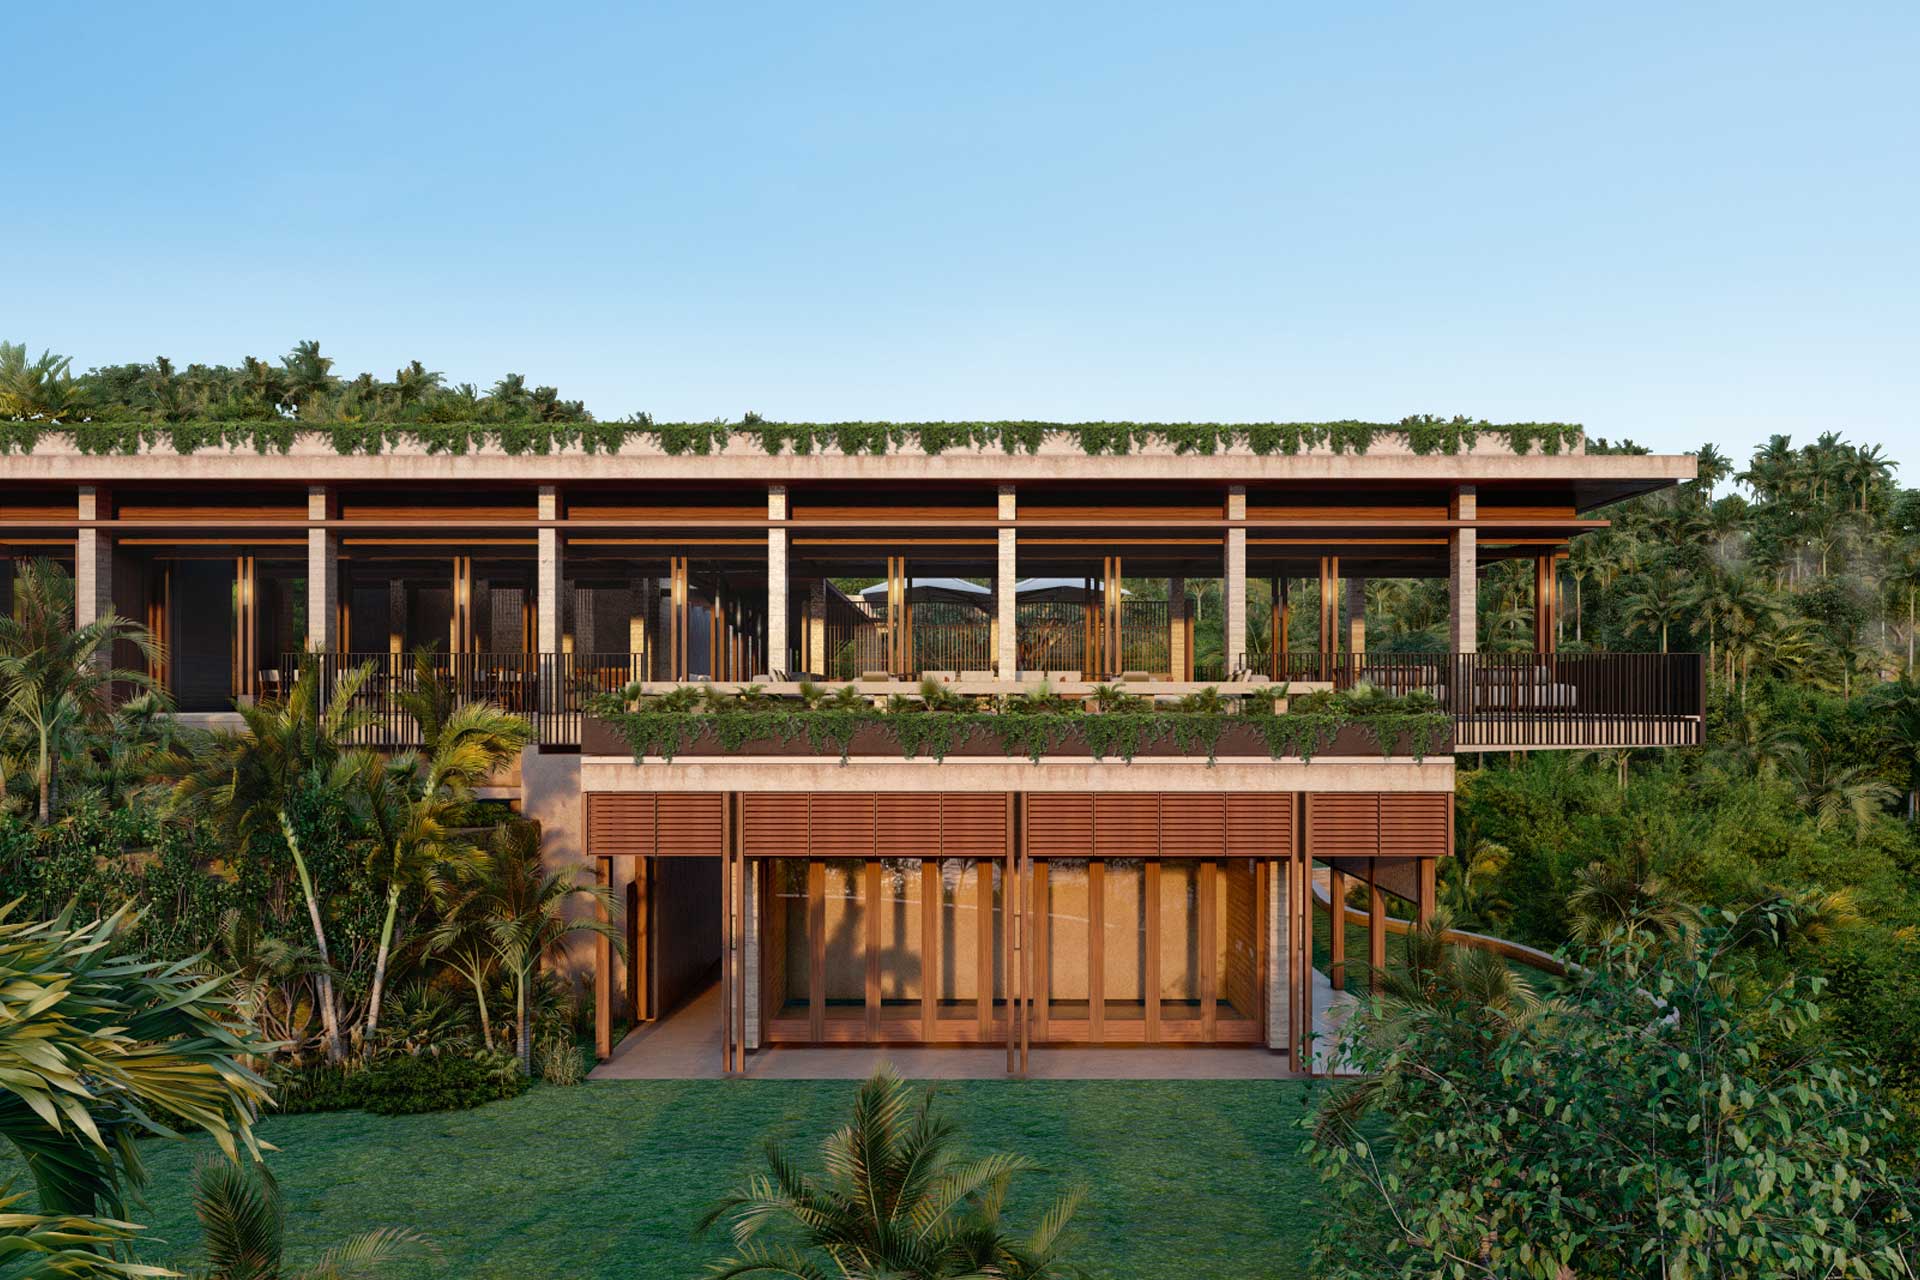 Siari by Ritz-Carlton in Mexico’s Nayarit is the epitome of bespoke beauty on the cliffside